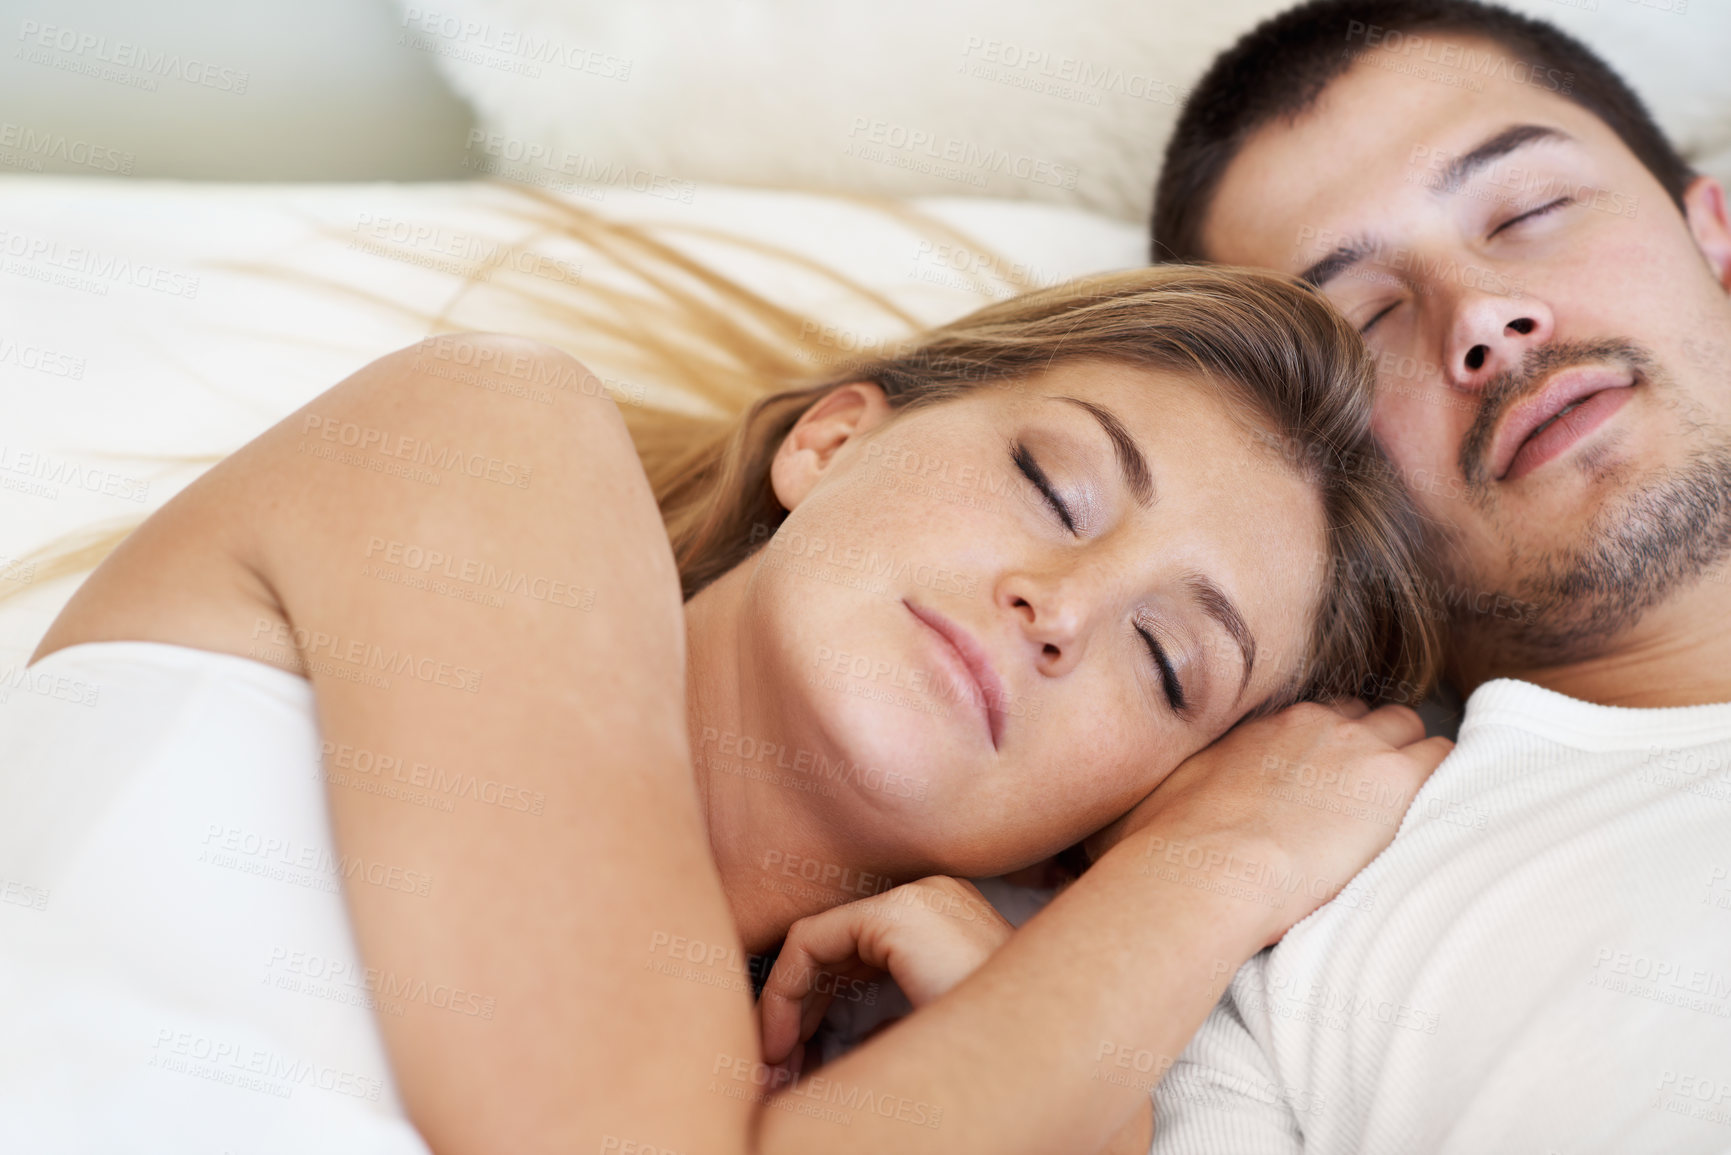 Buy stock photo Attractive young couple fast asleep together in bed